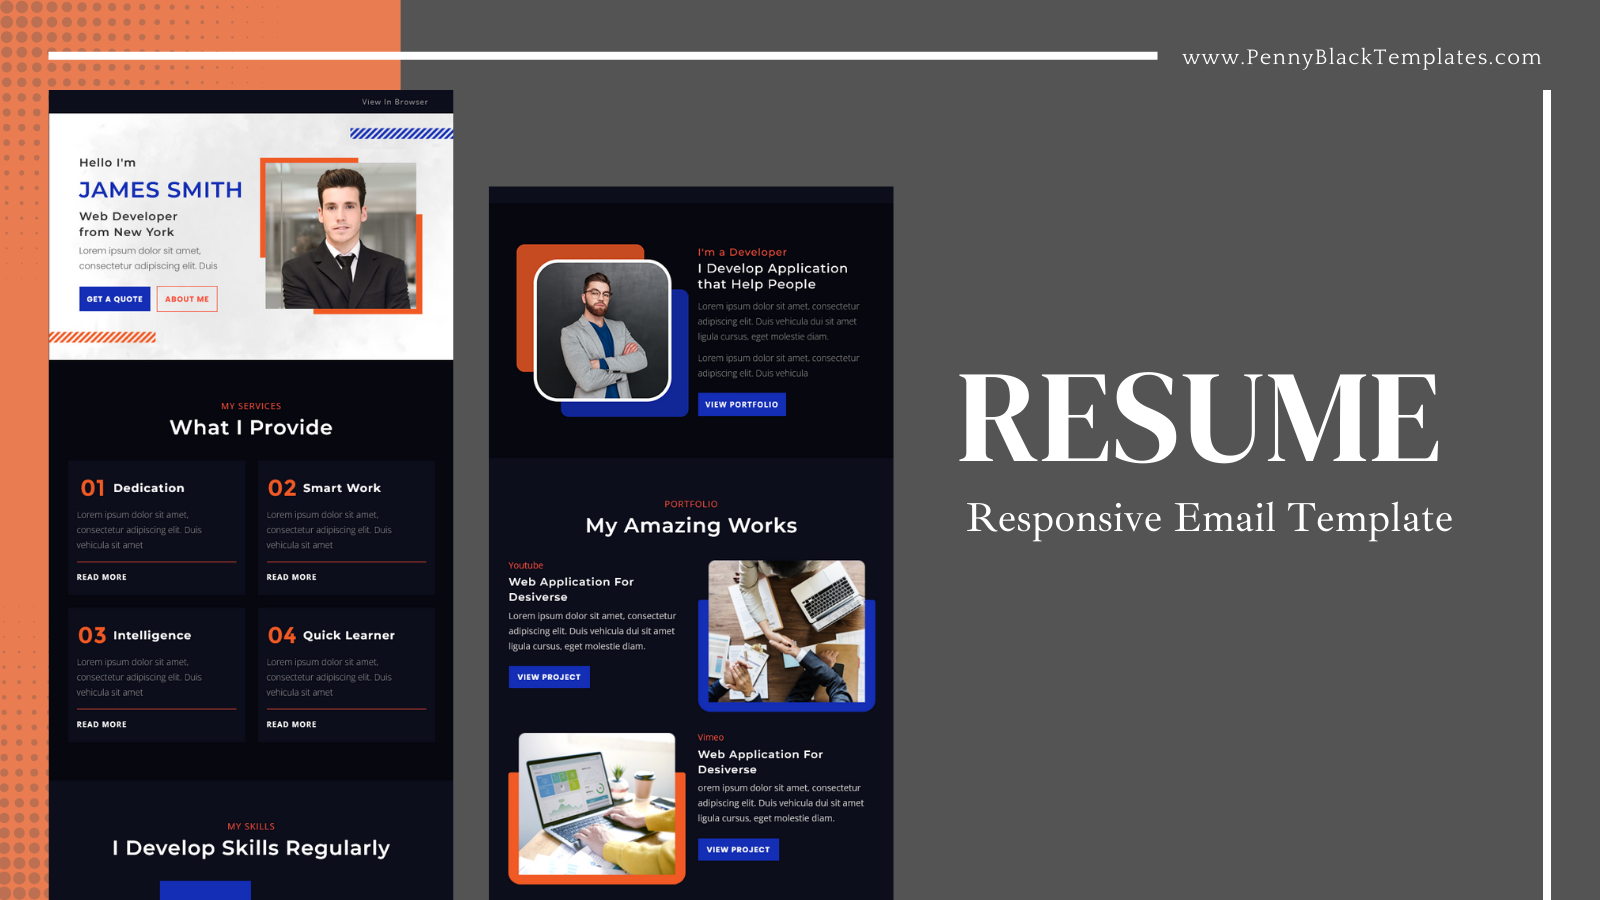 Resume – Responsive Email Template